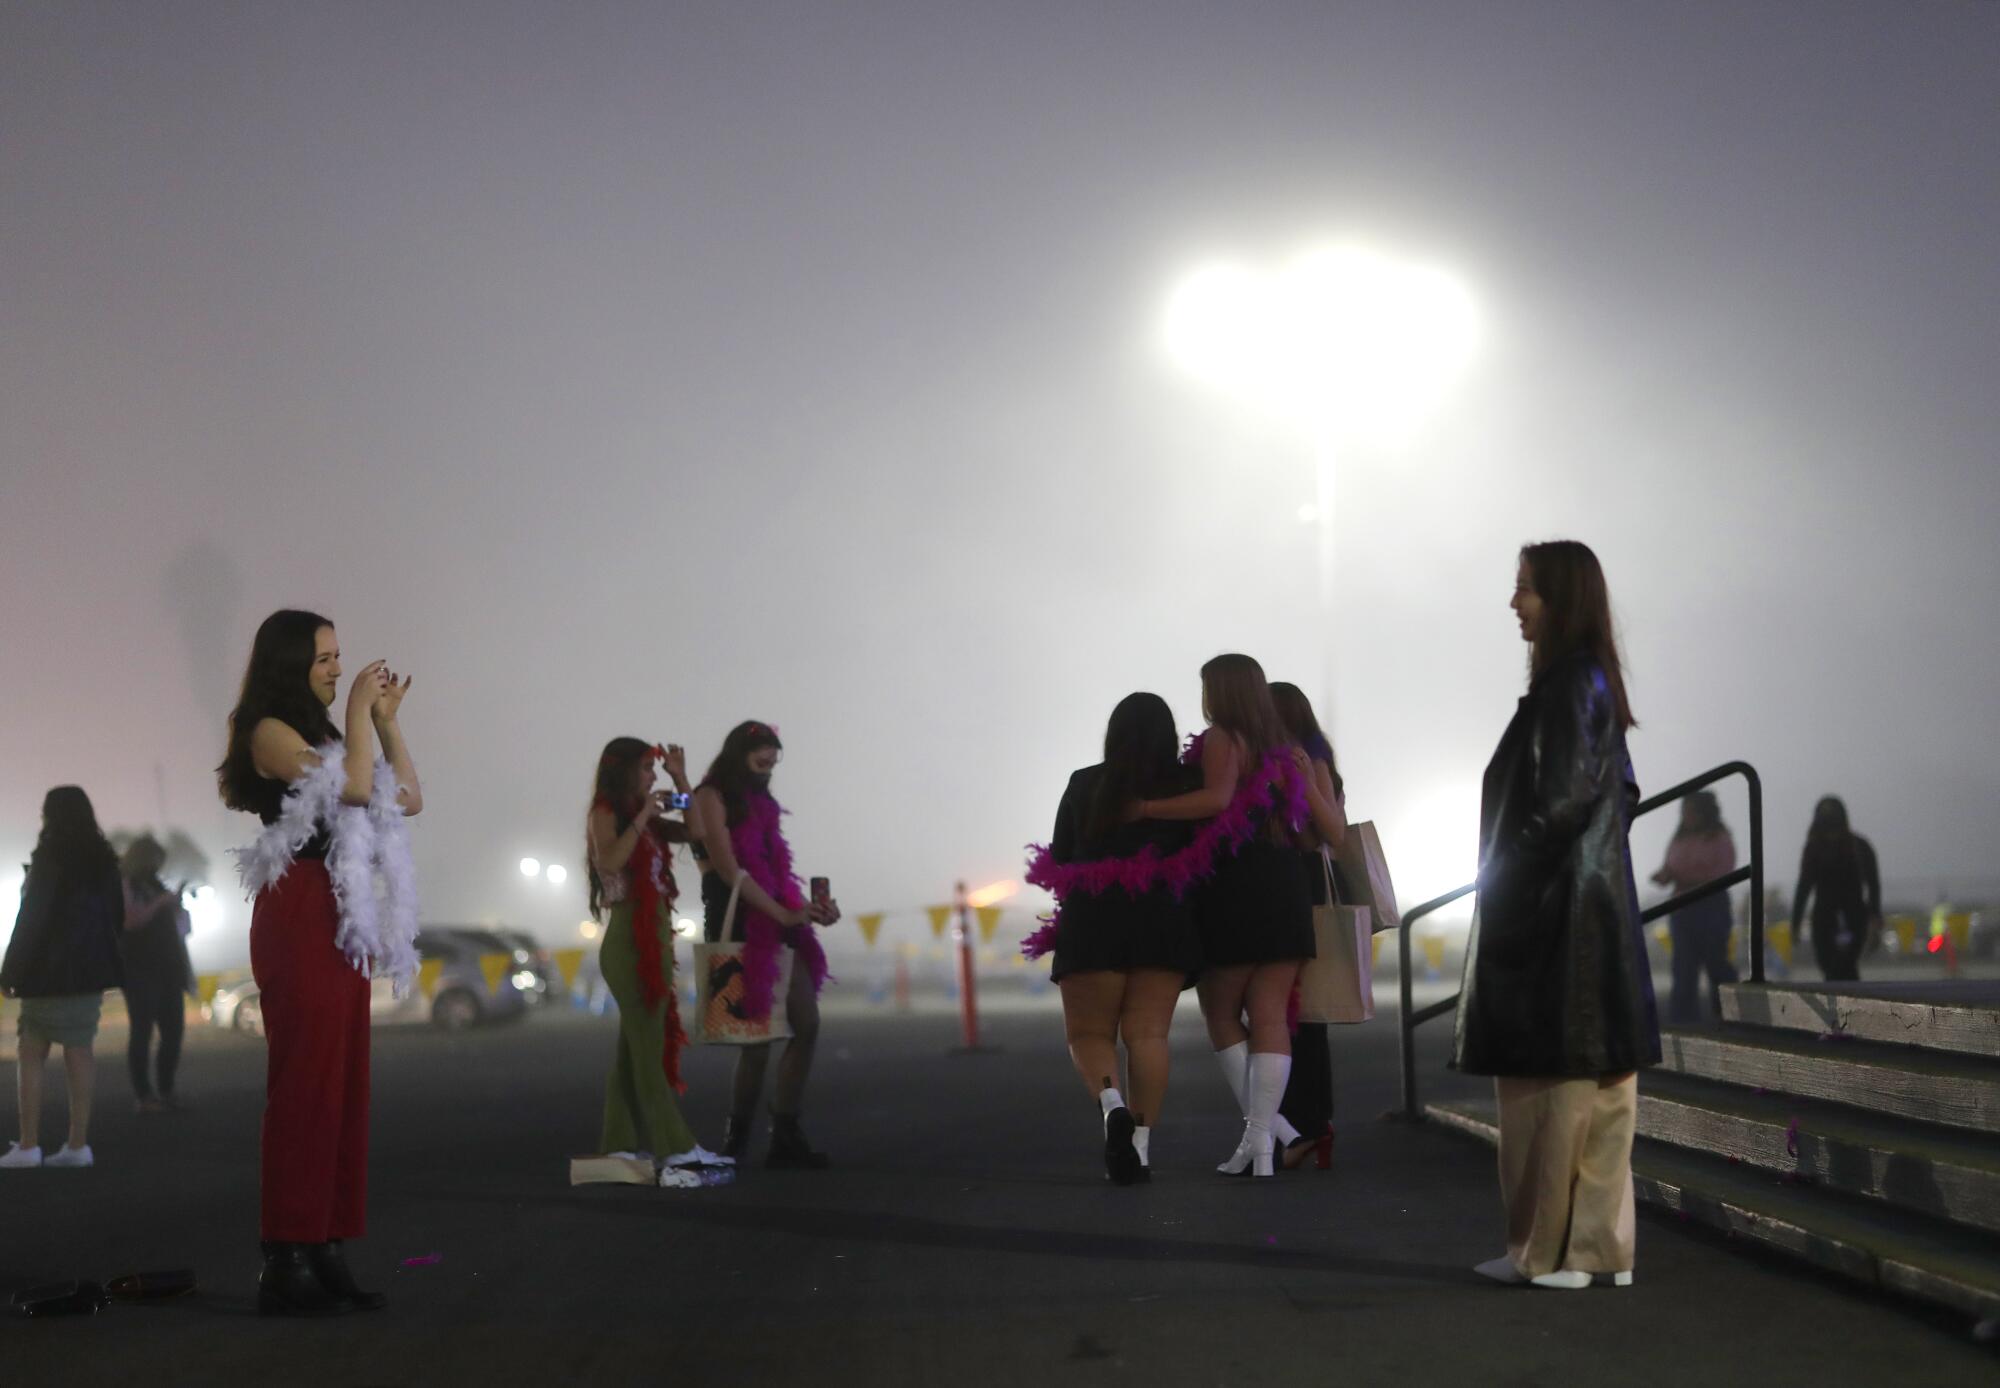 Fans take photos outside Pechanga Arena on a foggy night before the concert.